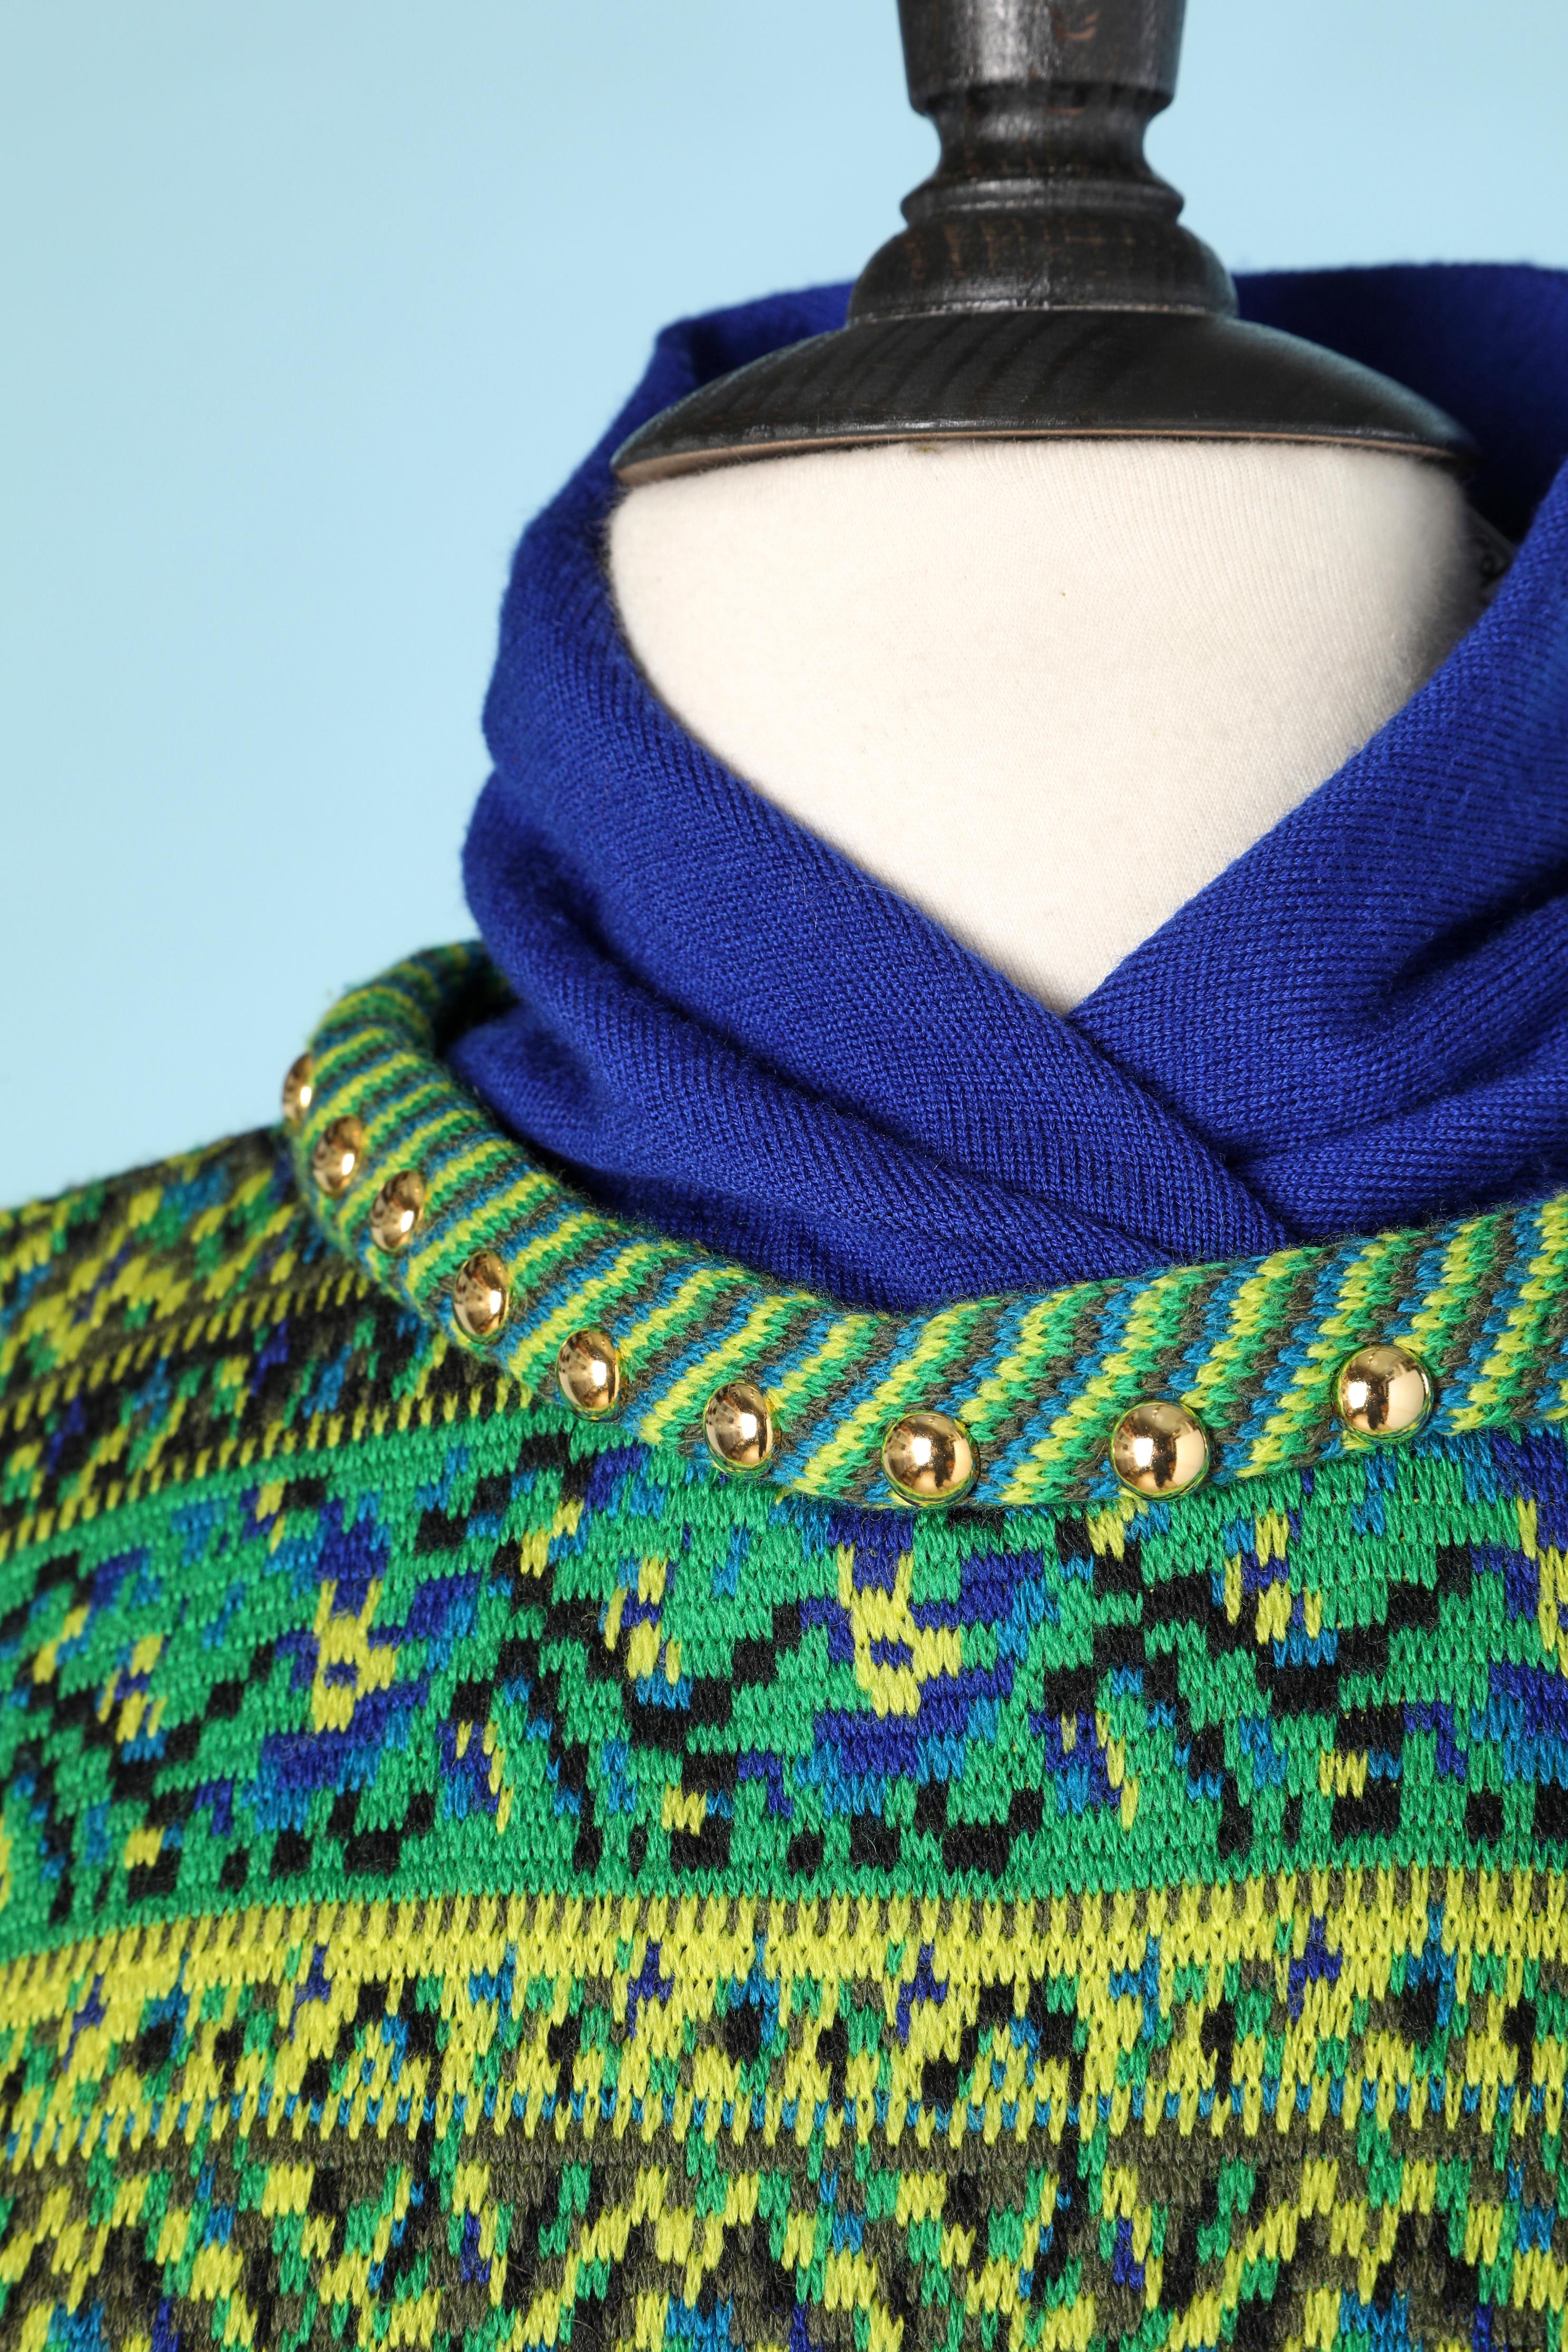 Blue and green jacquard sweater with gold studs and a blue knit collar 